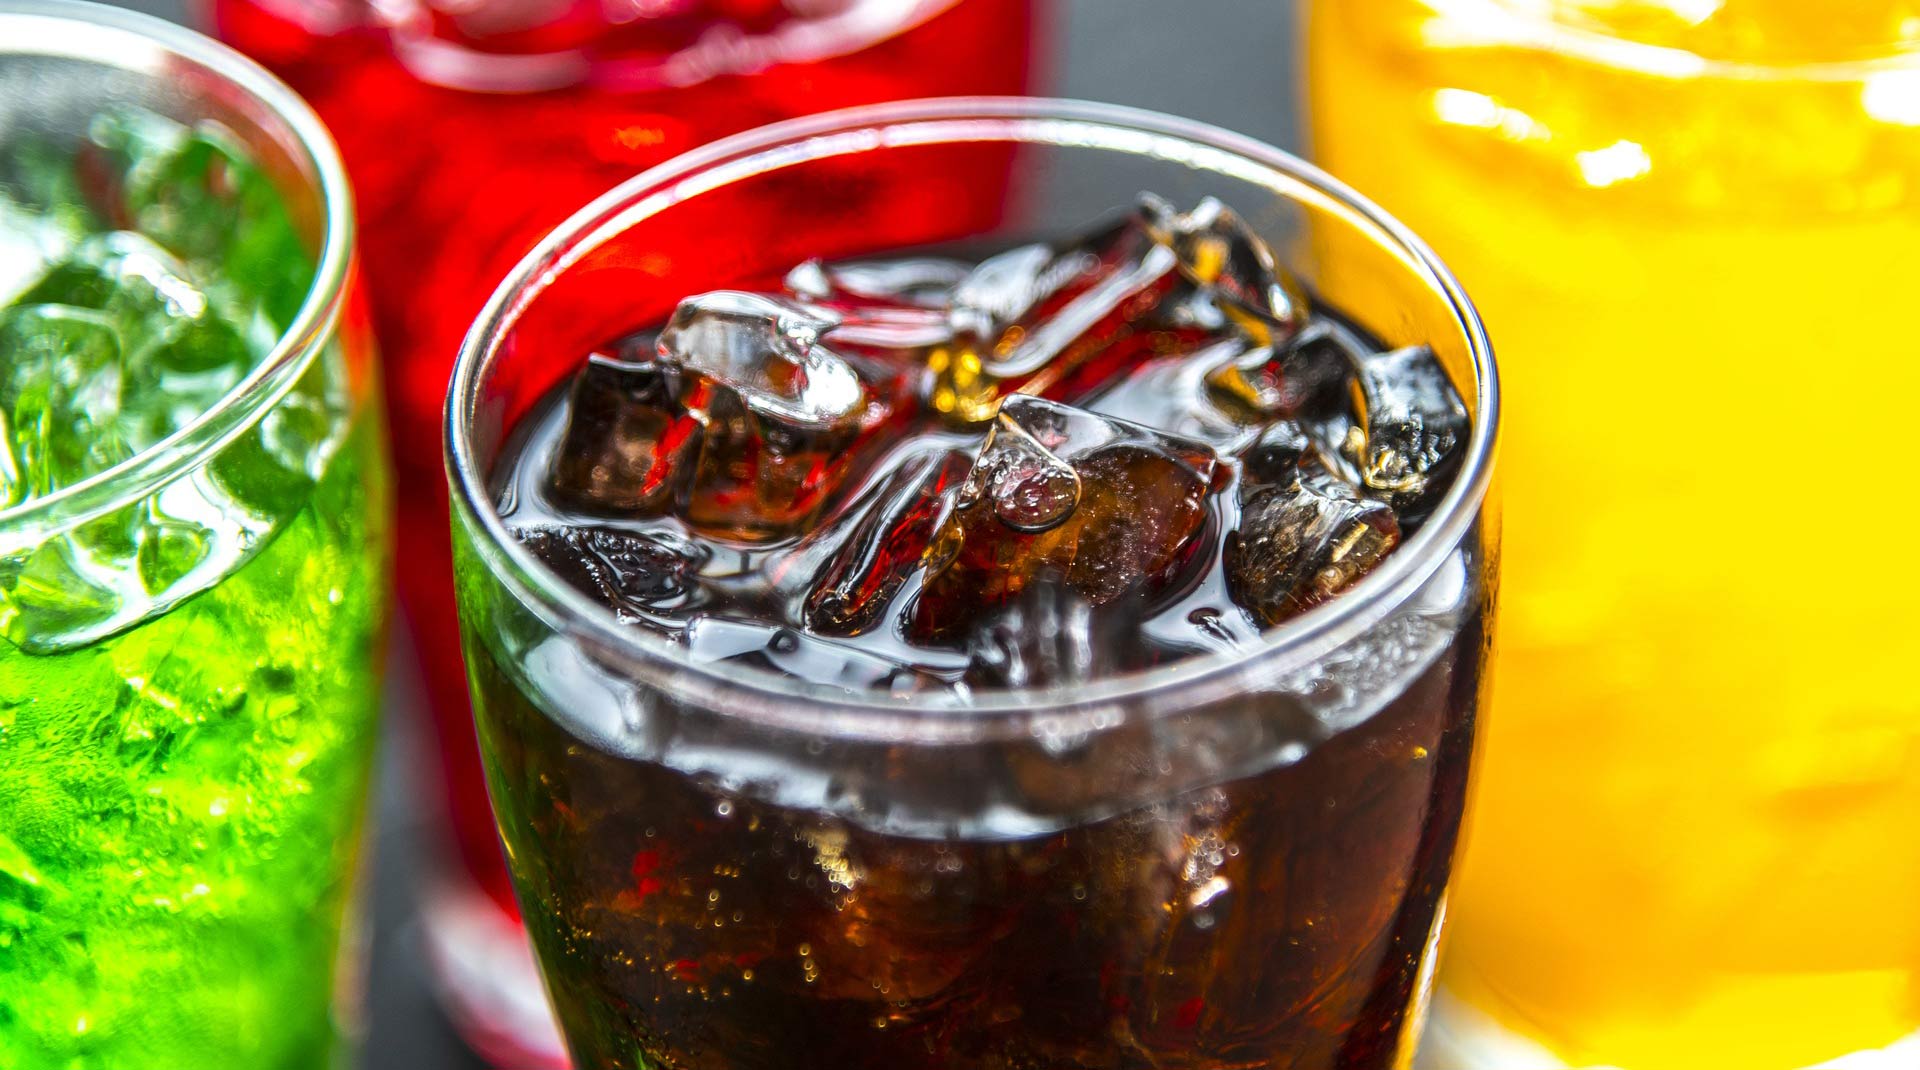 Effect of sugar-sweetened beverages on health